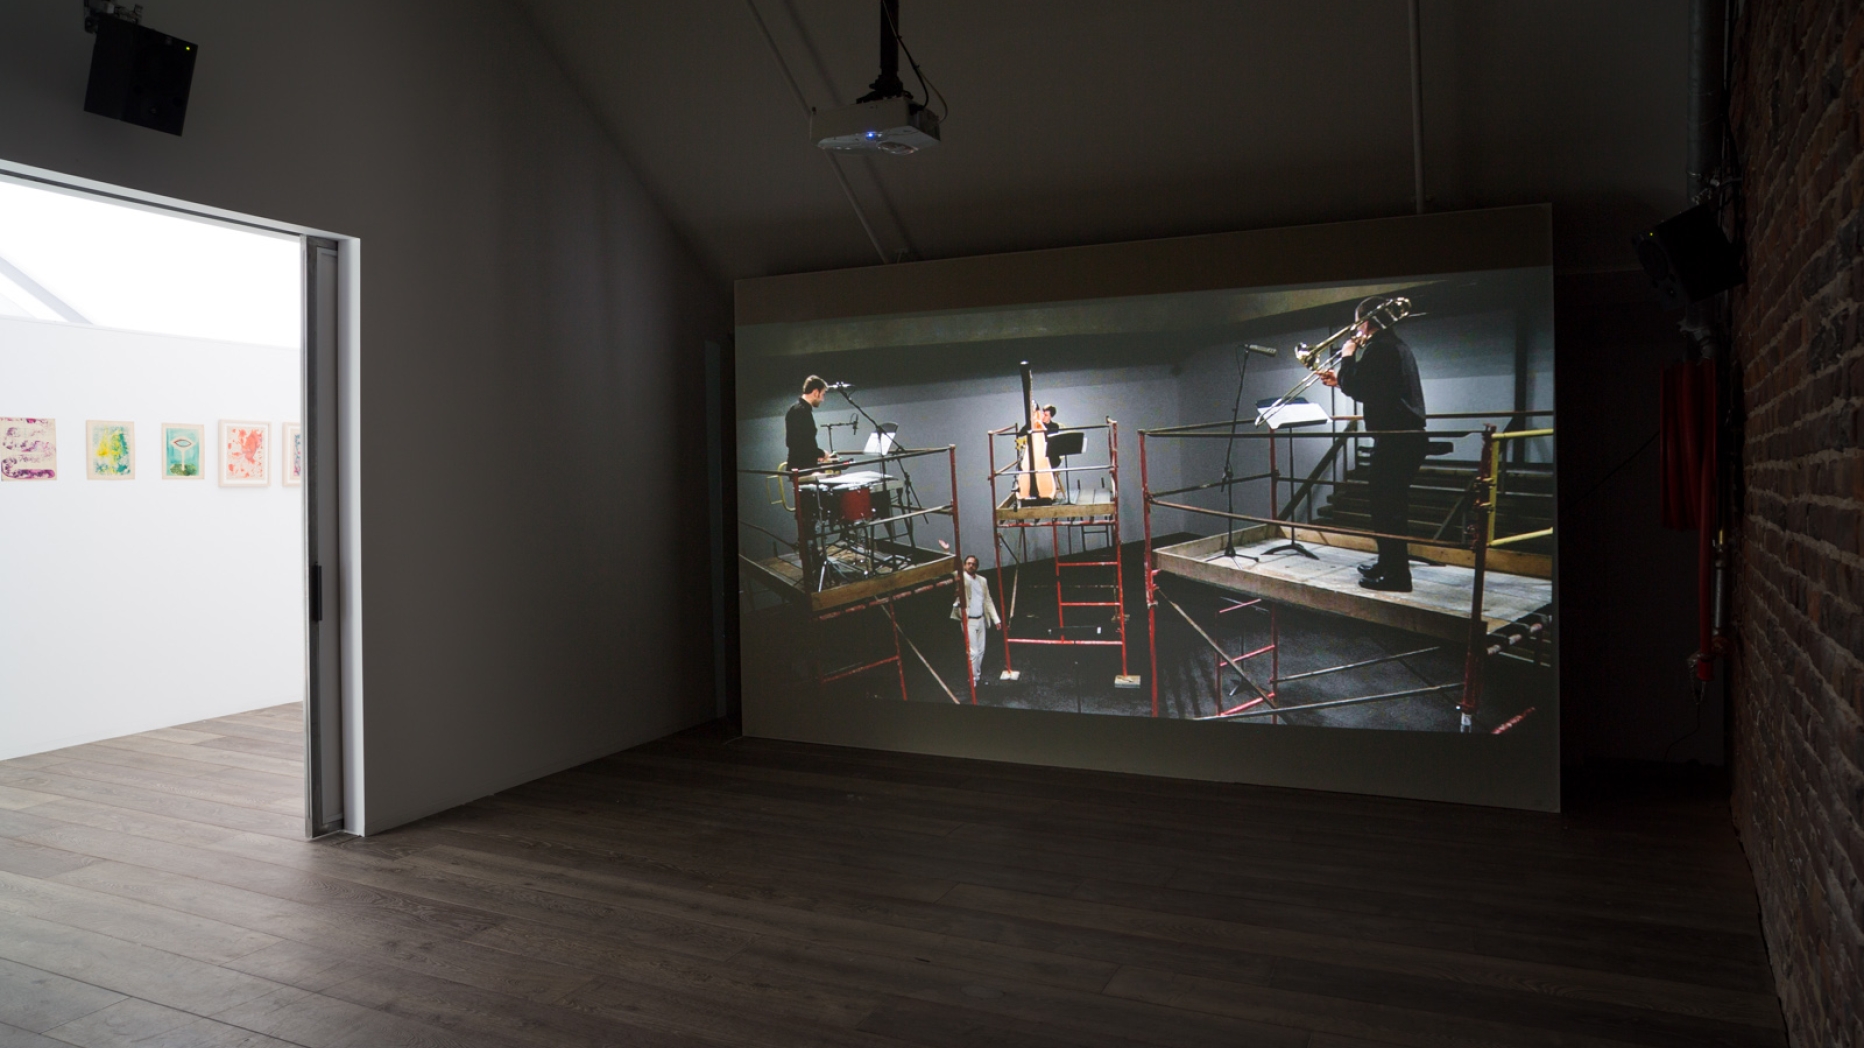 Gallery with image projected on to a wall in a dark room